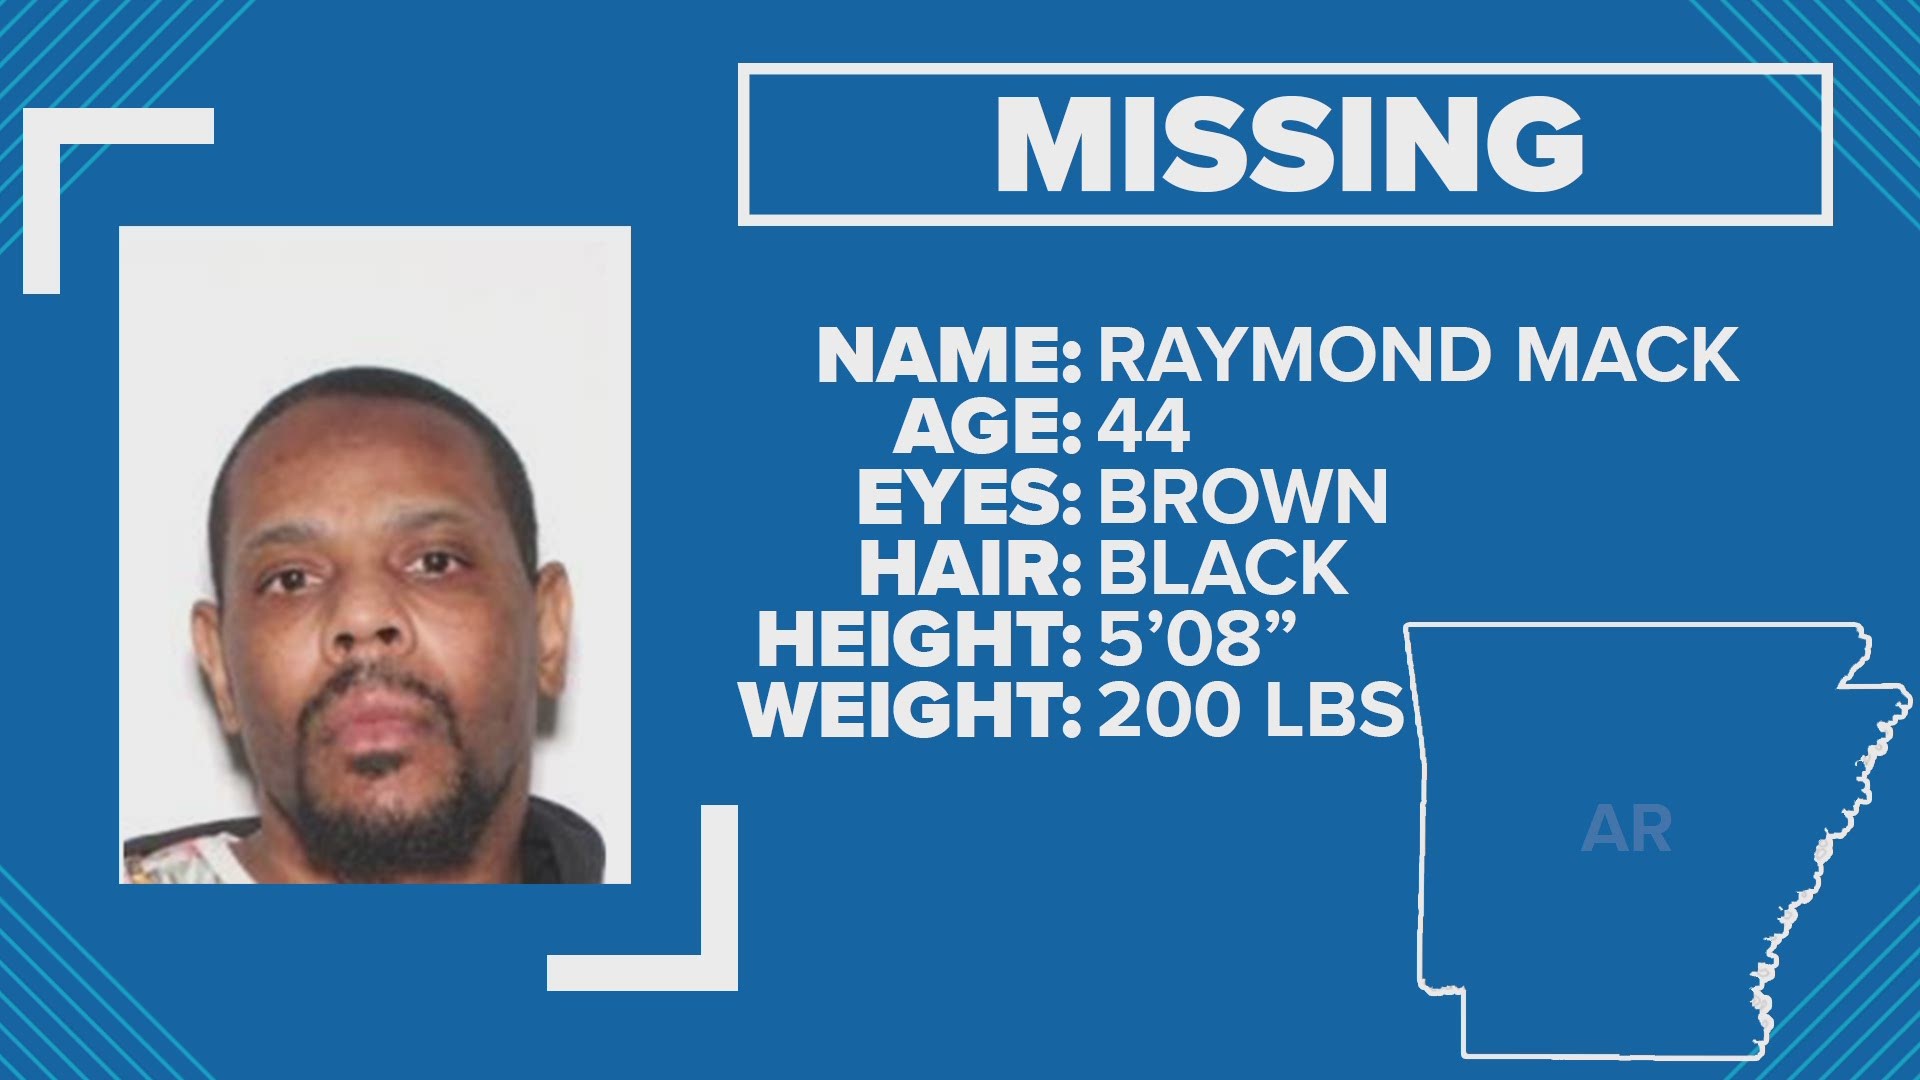 Little Rock police searching for missing 44-year-old man